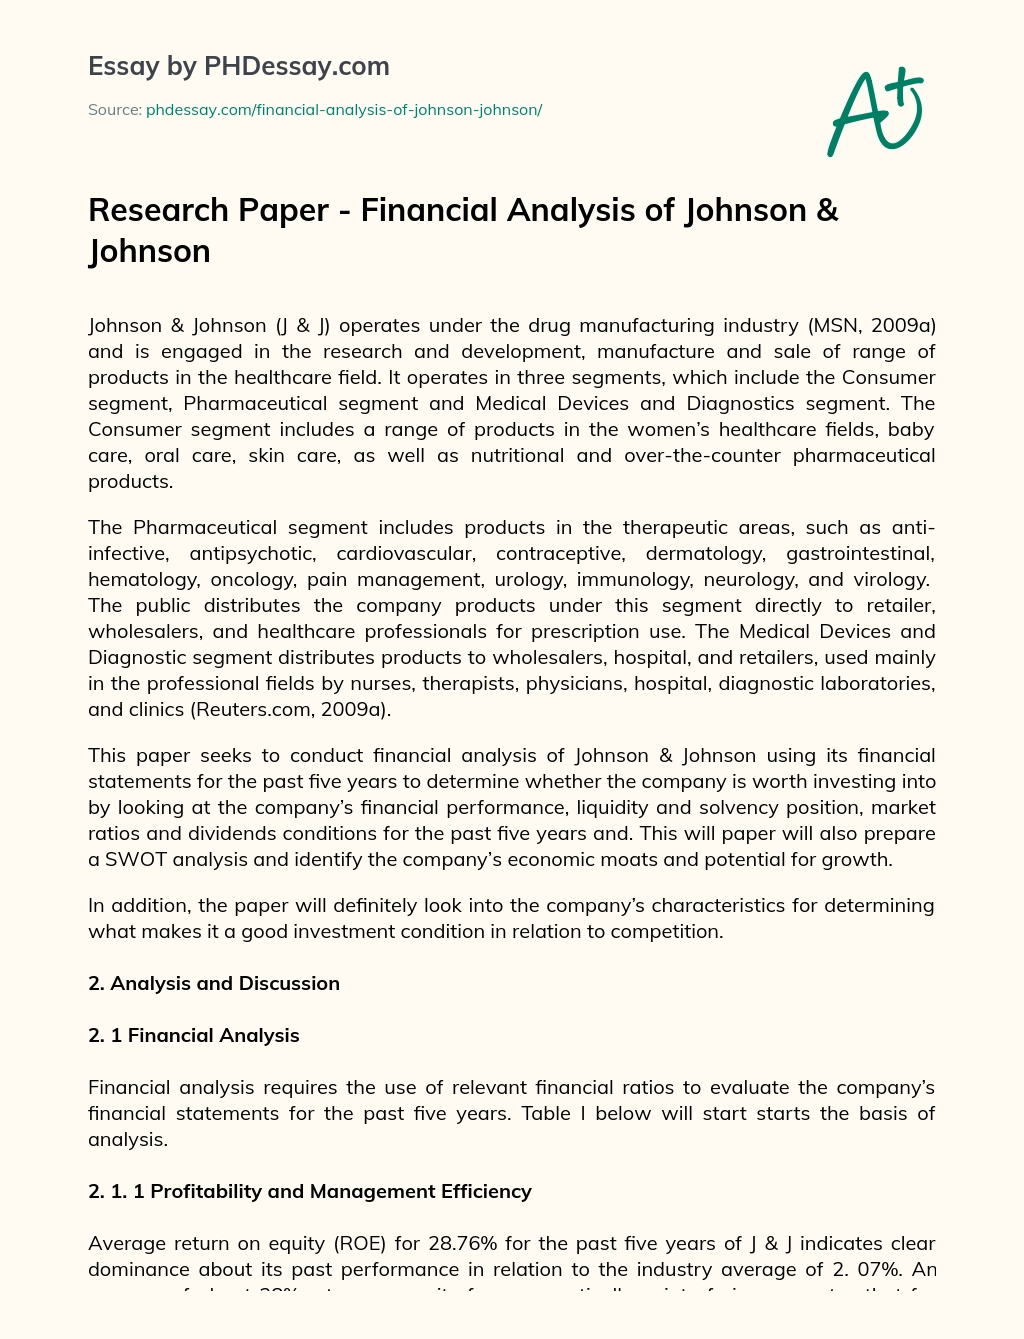 Research Paper – Financial Analysis of Johnson & Johnson essay